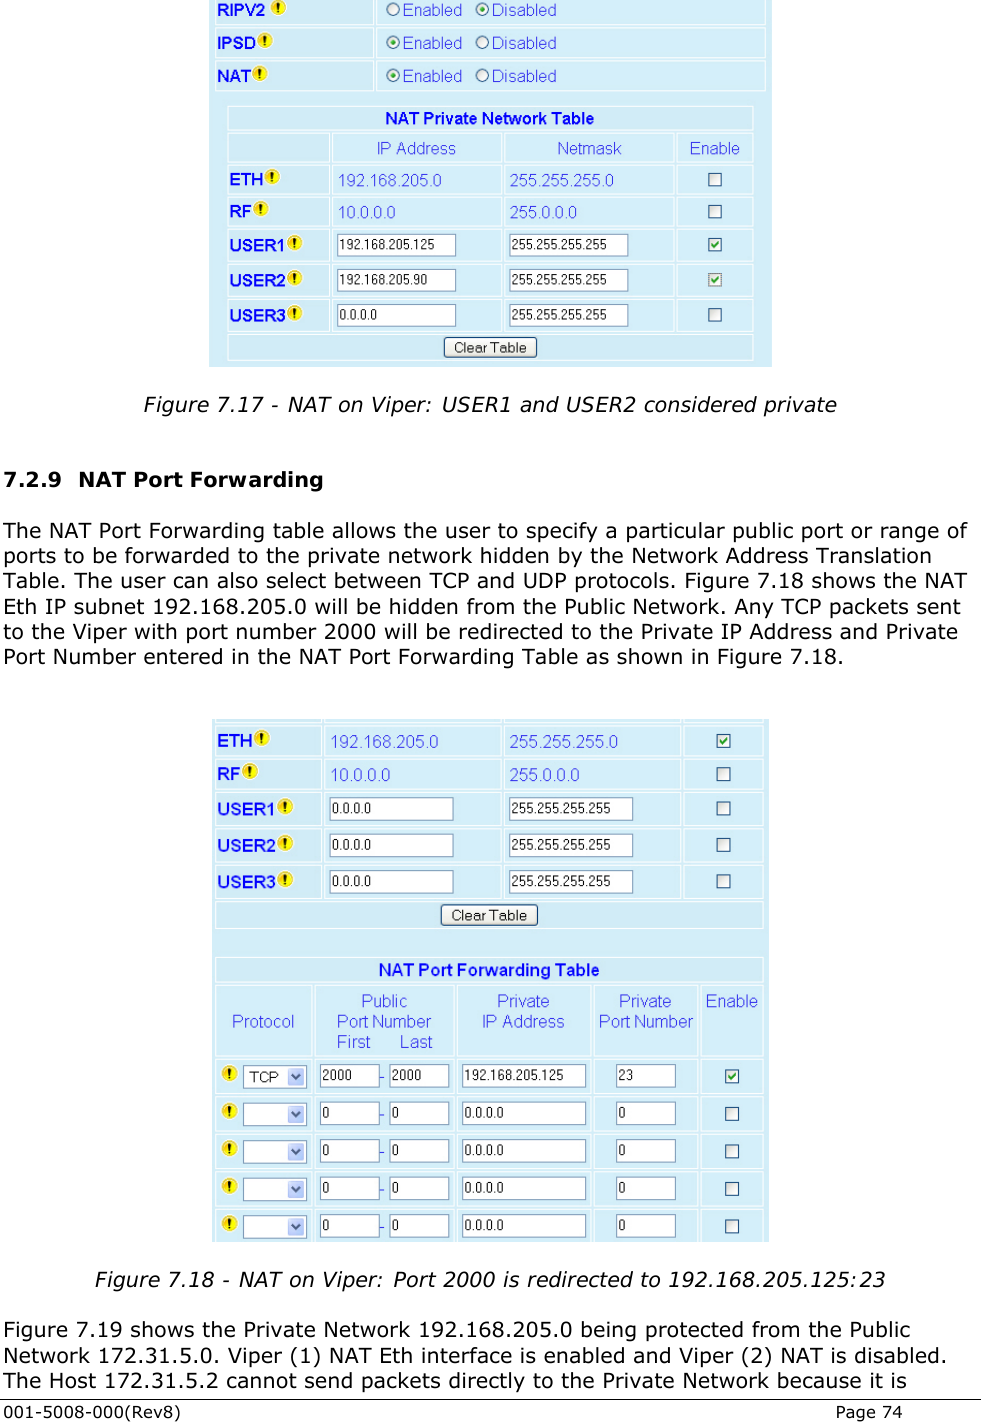    Figure 7.17 - NAT on Viper: USER1 and USER2 considered private  7.2.9 NAT Port Forwarding The NAT Port Forwarding table allows the user to specify a particular public port or range of ports to be forwarded to the private network hidden by the Network Address Translation Table. The user can also select between TCP and UDP protocols. Figure 7.18 shows the NAT Eth IP subnet 192.168.205.0 will be hidden from the Public Network. Any TCP packets sent to the Viper with port number 2000 will be redirected to the Private IP Address and Private Port Number entered in the NAT Port Forwarding Table as shown in Figure 7.18.     Figure 7.18 - NAT on Viper: Port 2000 is redirected to 192.168.205.125:23  Figure 7.19 shows the Private Network 192.168.205.0 being protected from the Public Network 172.31.5.0. Viper (1) NAT Eth interface is enabled and Viper (2) NAT is disabled.  The Host 172.31.5.2 cannot send packets directly to the Private Network because it is 001-5008-000(Rev8)   Page 74 